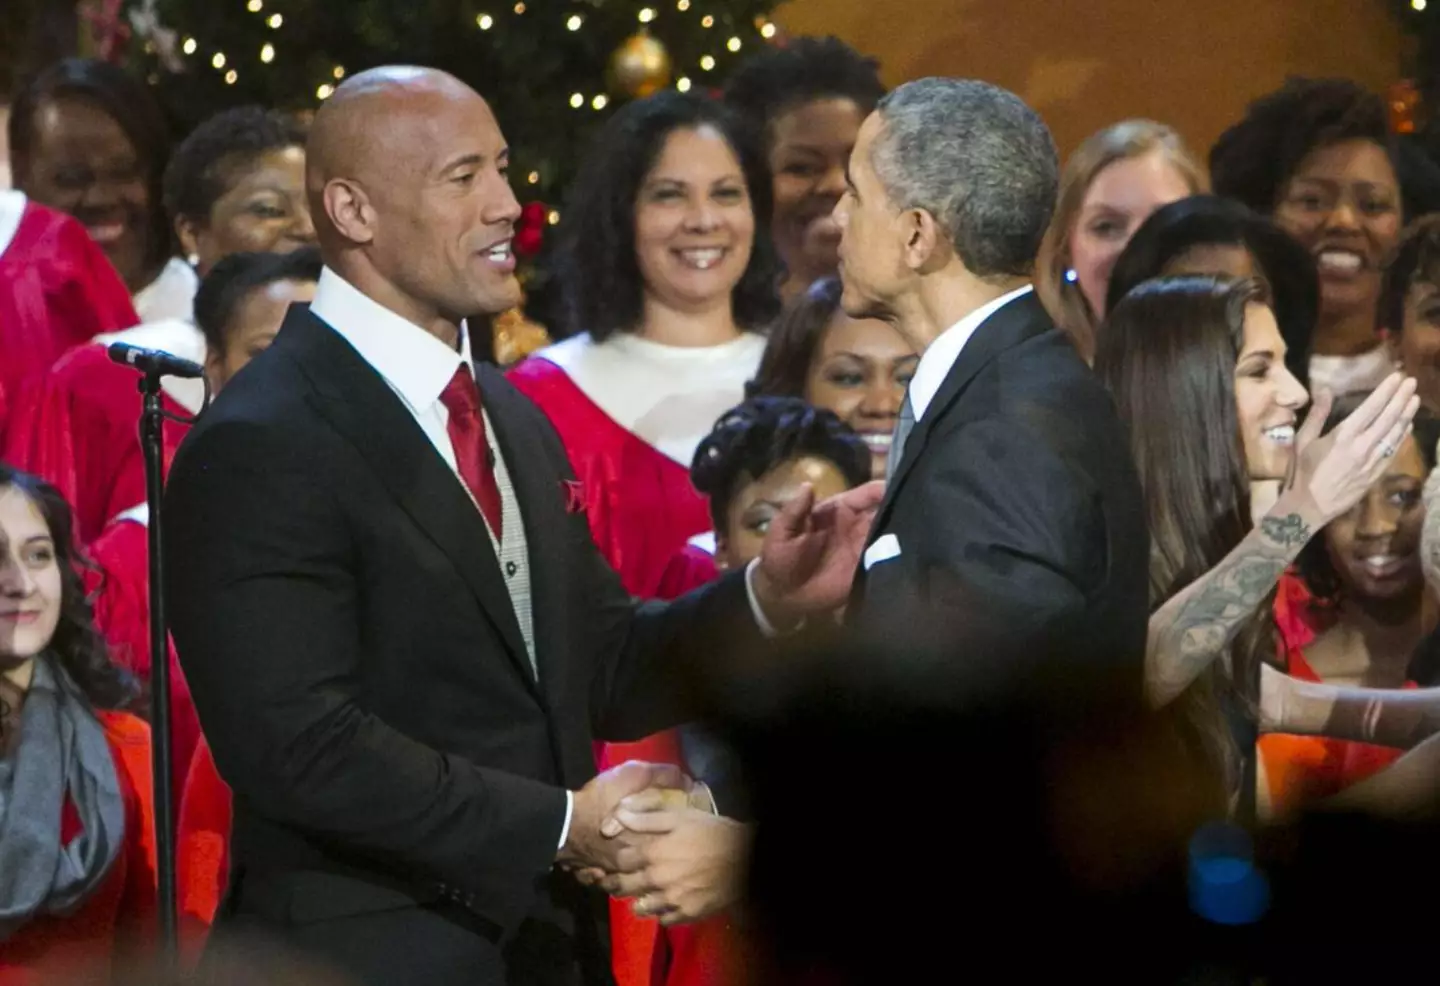 The Rock with Barack Obama.